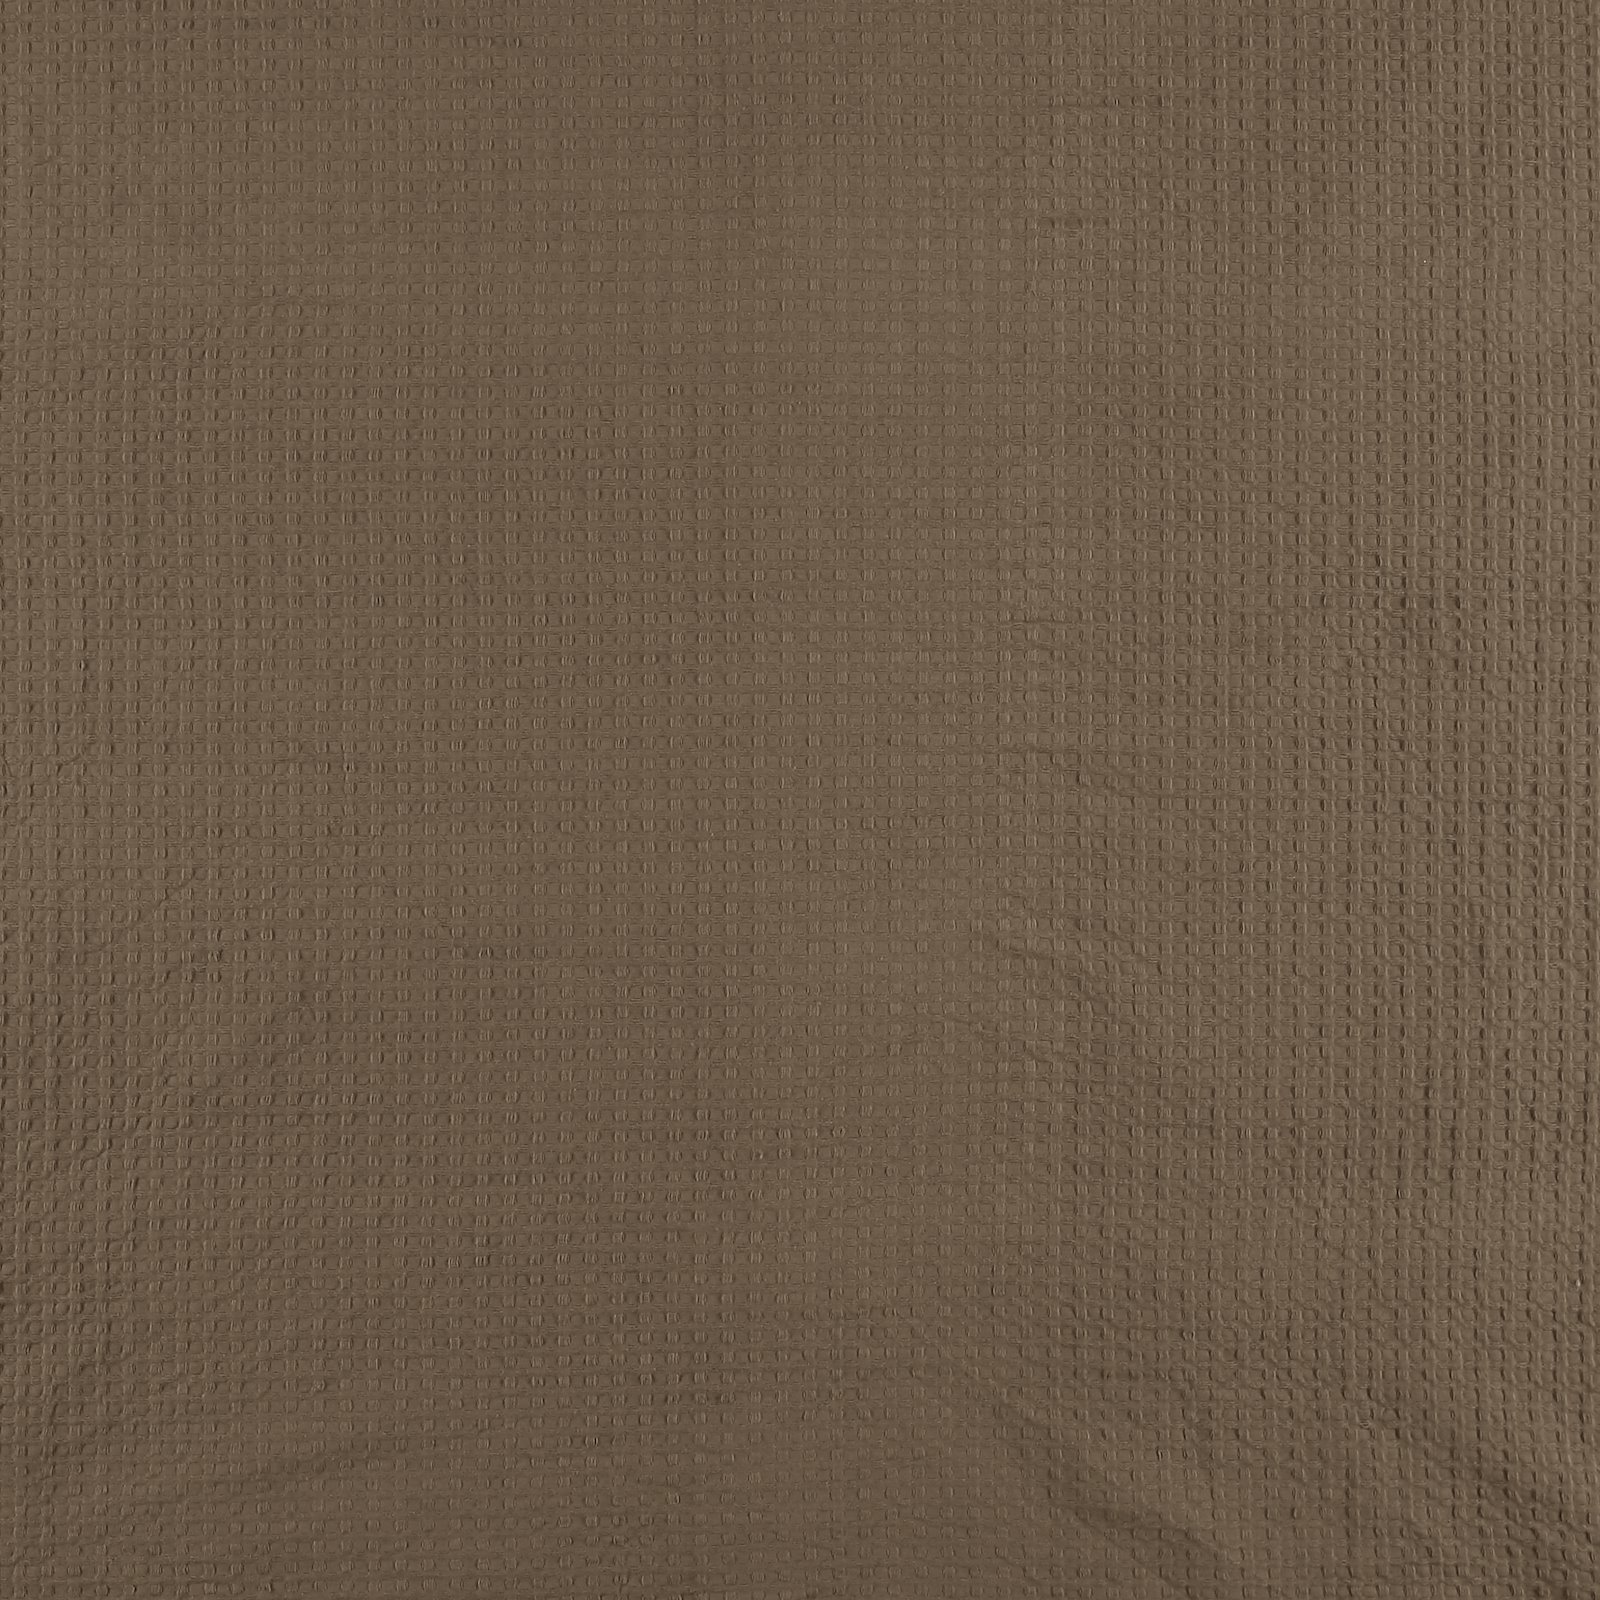 Woven jacquard light walnut w structure 501727_pack_solid